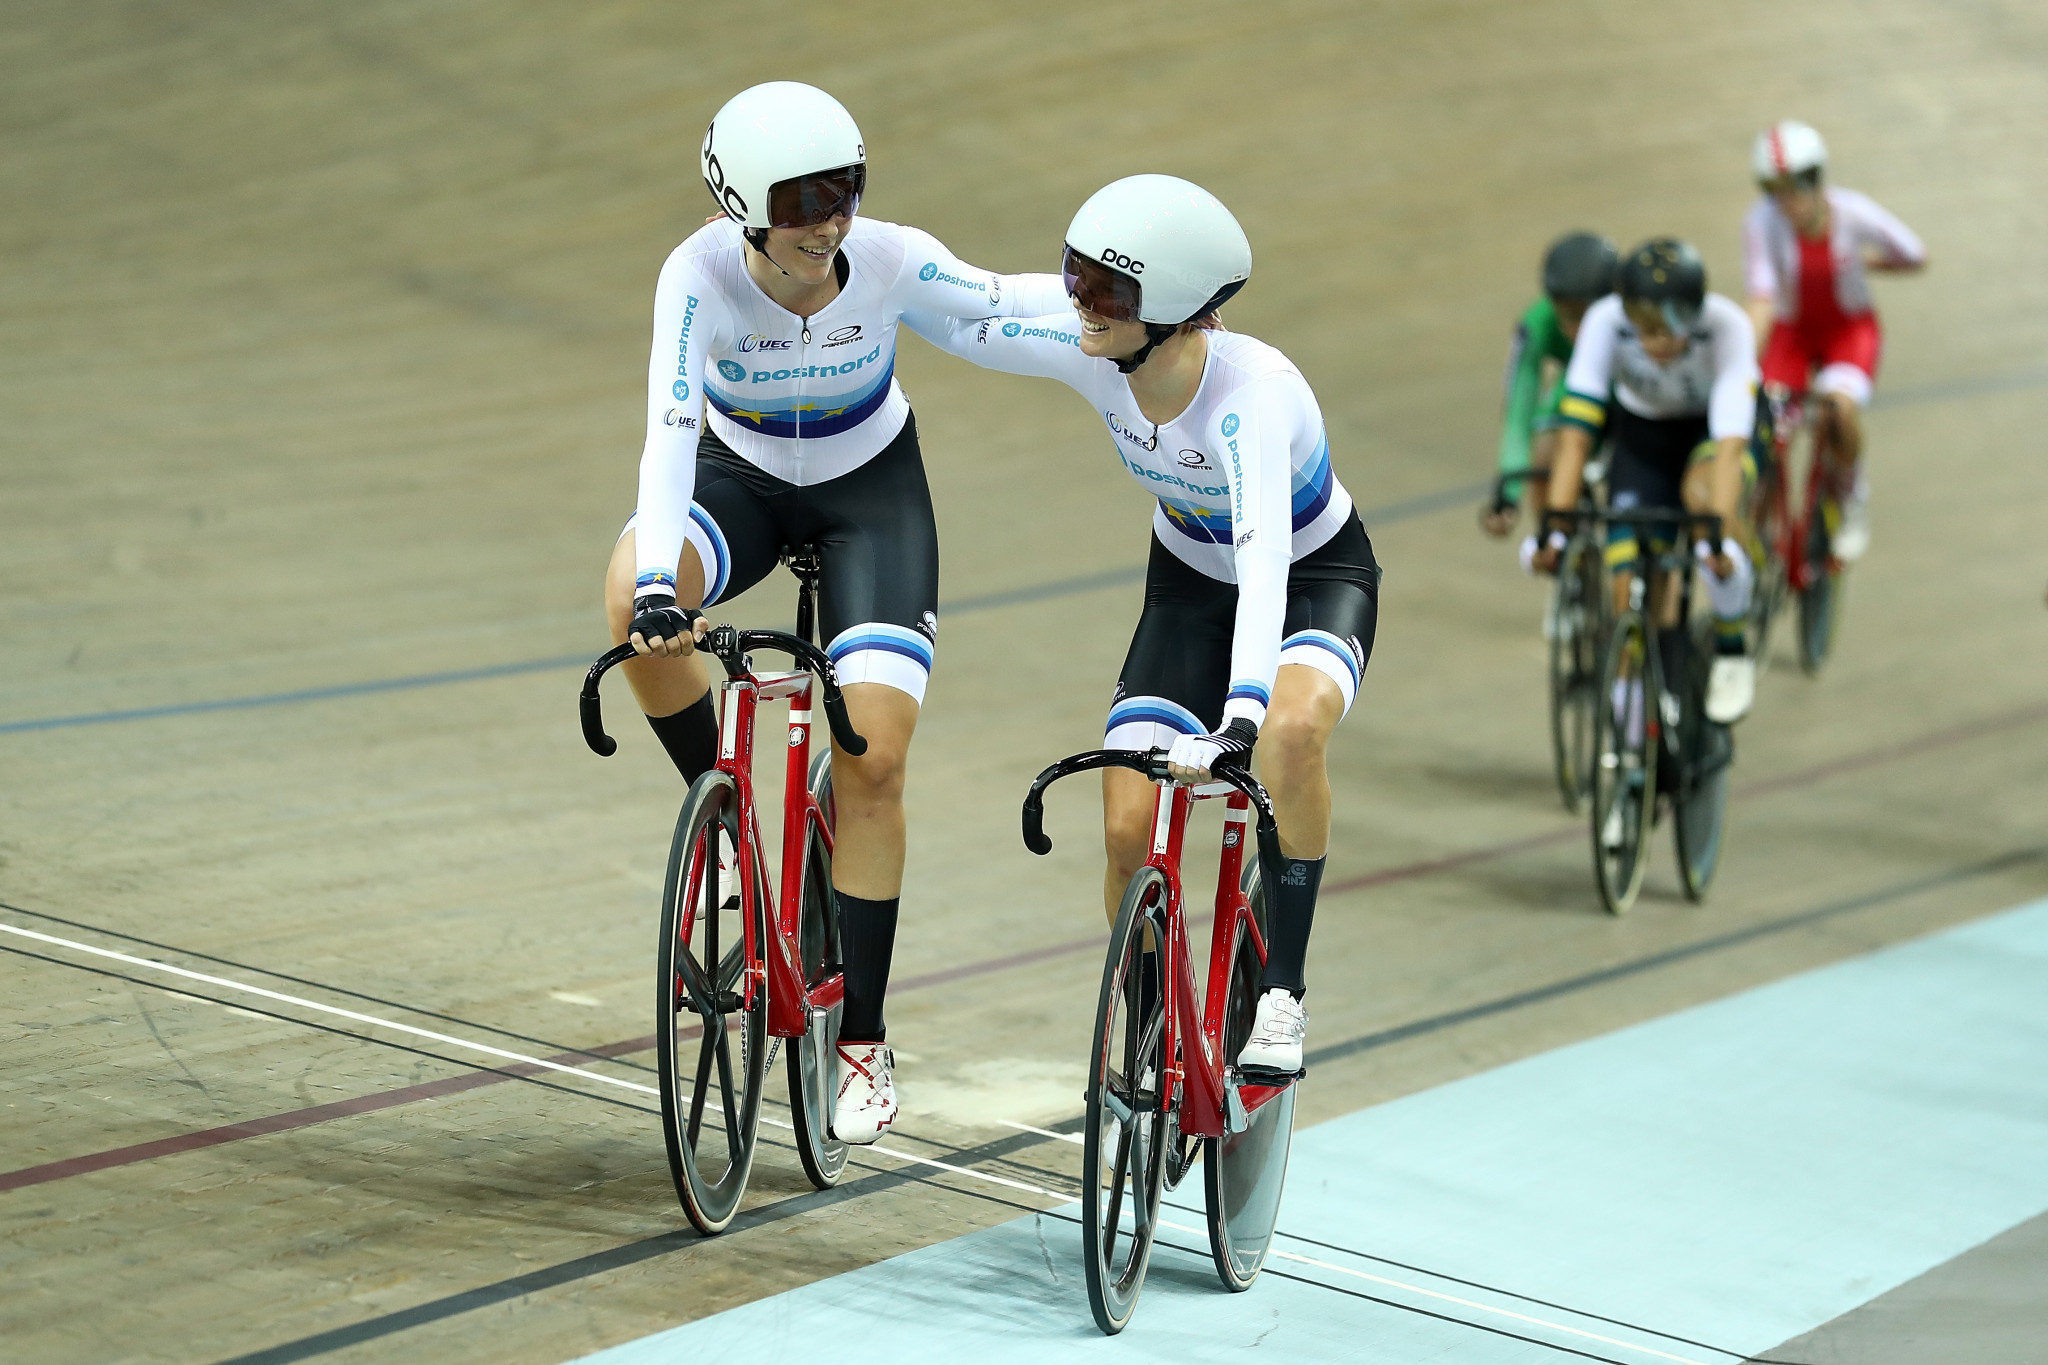 Danish double on final day of UEC European Track Championships